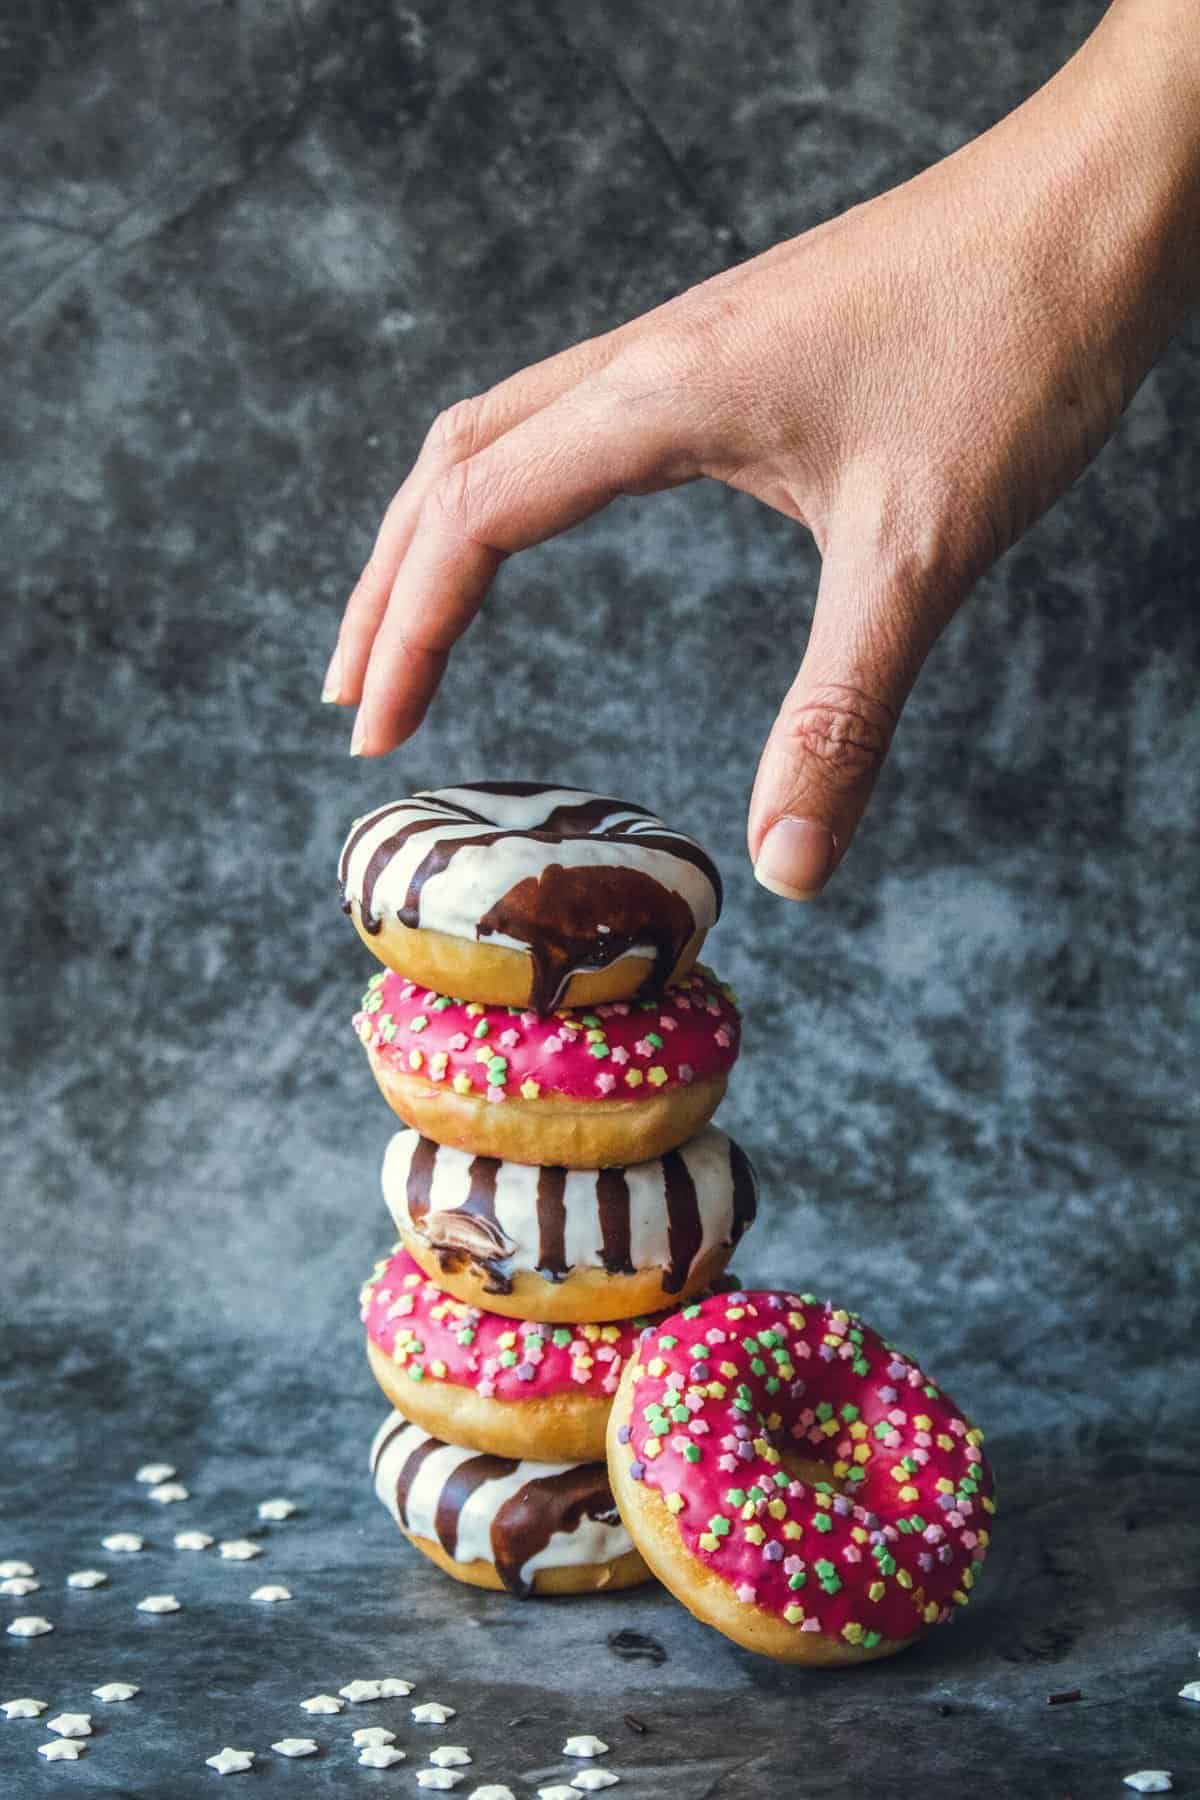 mini donuts glazed with white and black chocolate and garnished with colorful sprinkles